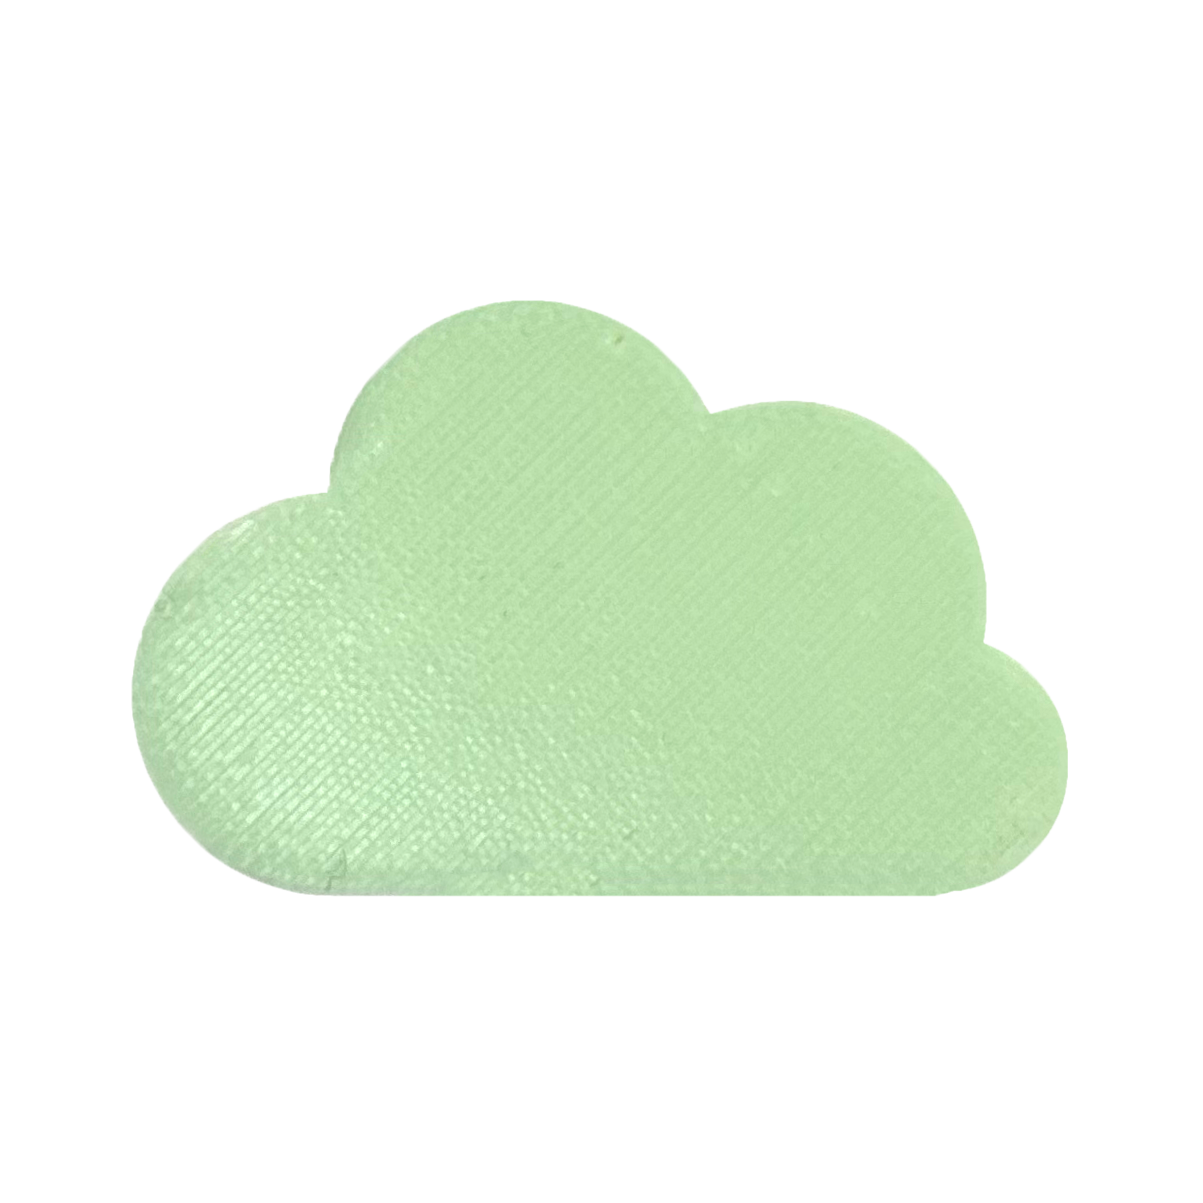 This is a sample of our mint green eco friendly 3D printer filament. Light, bright, and refreshing like a spring rain shower, this green is the perfect match of sea foam and mint.